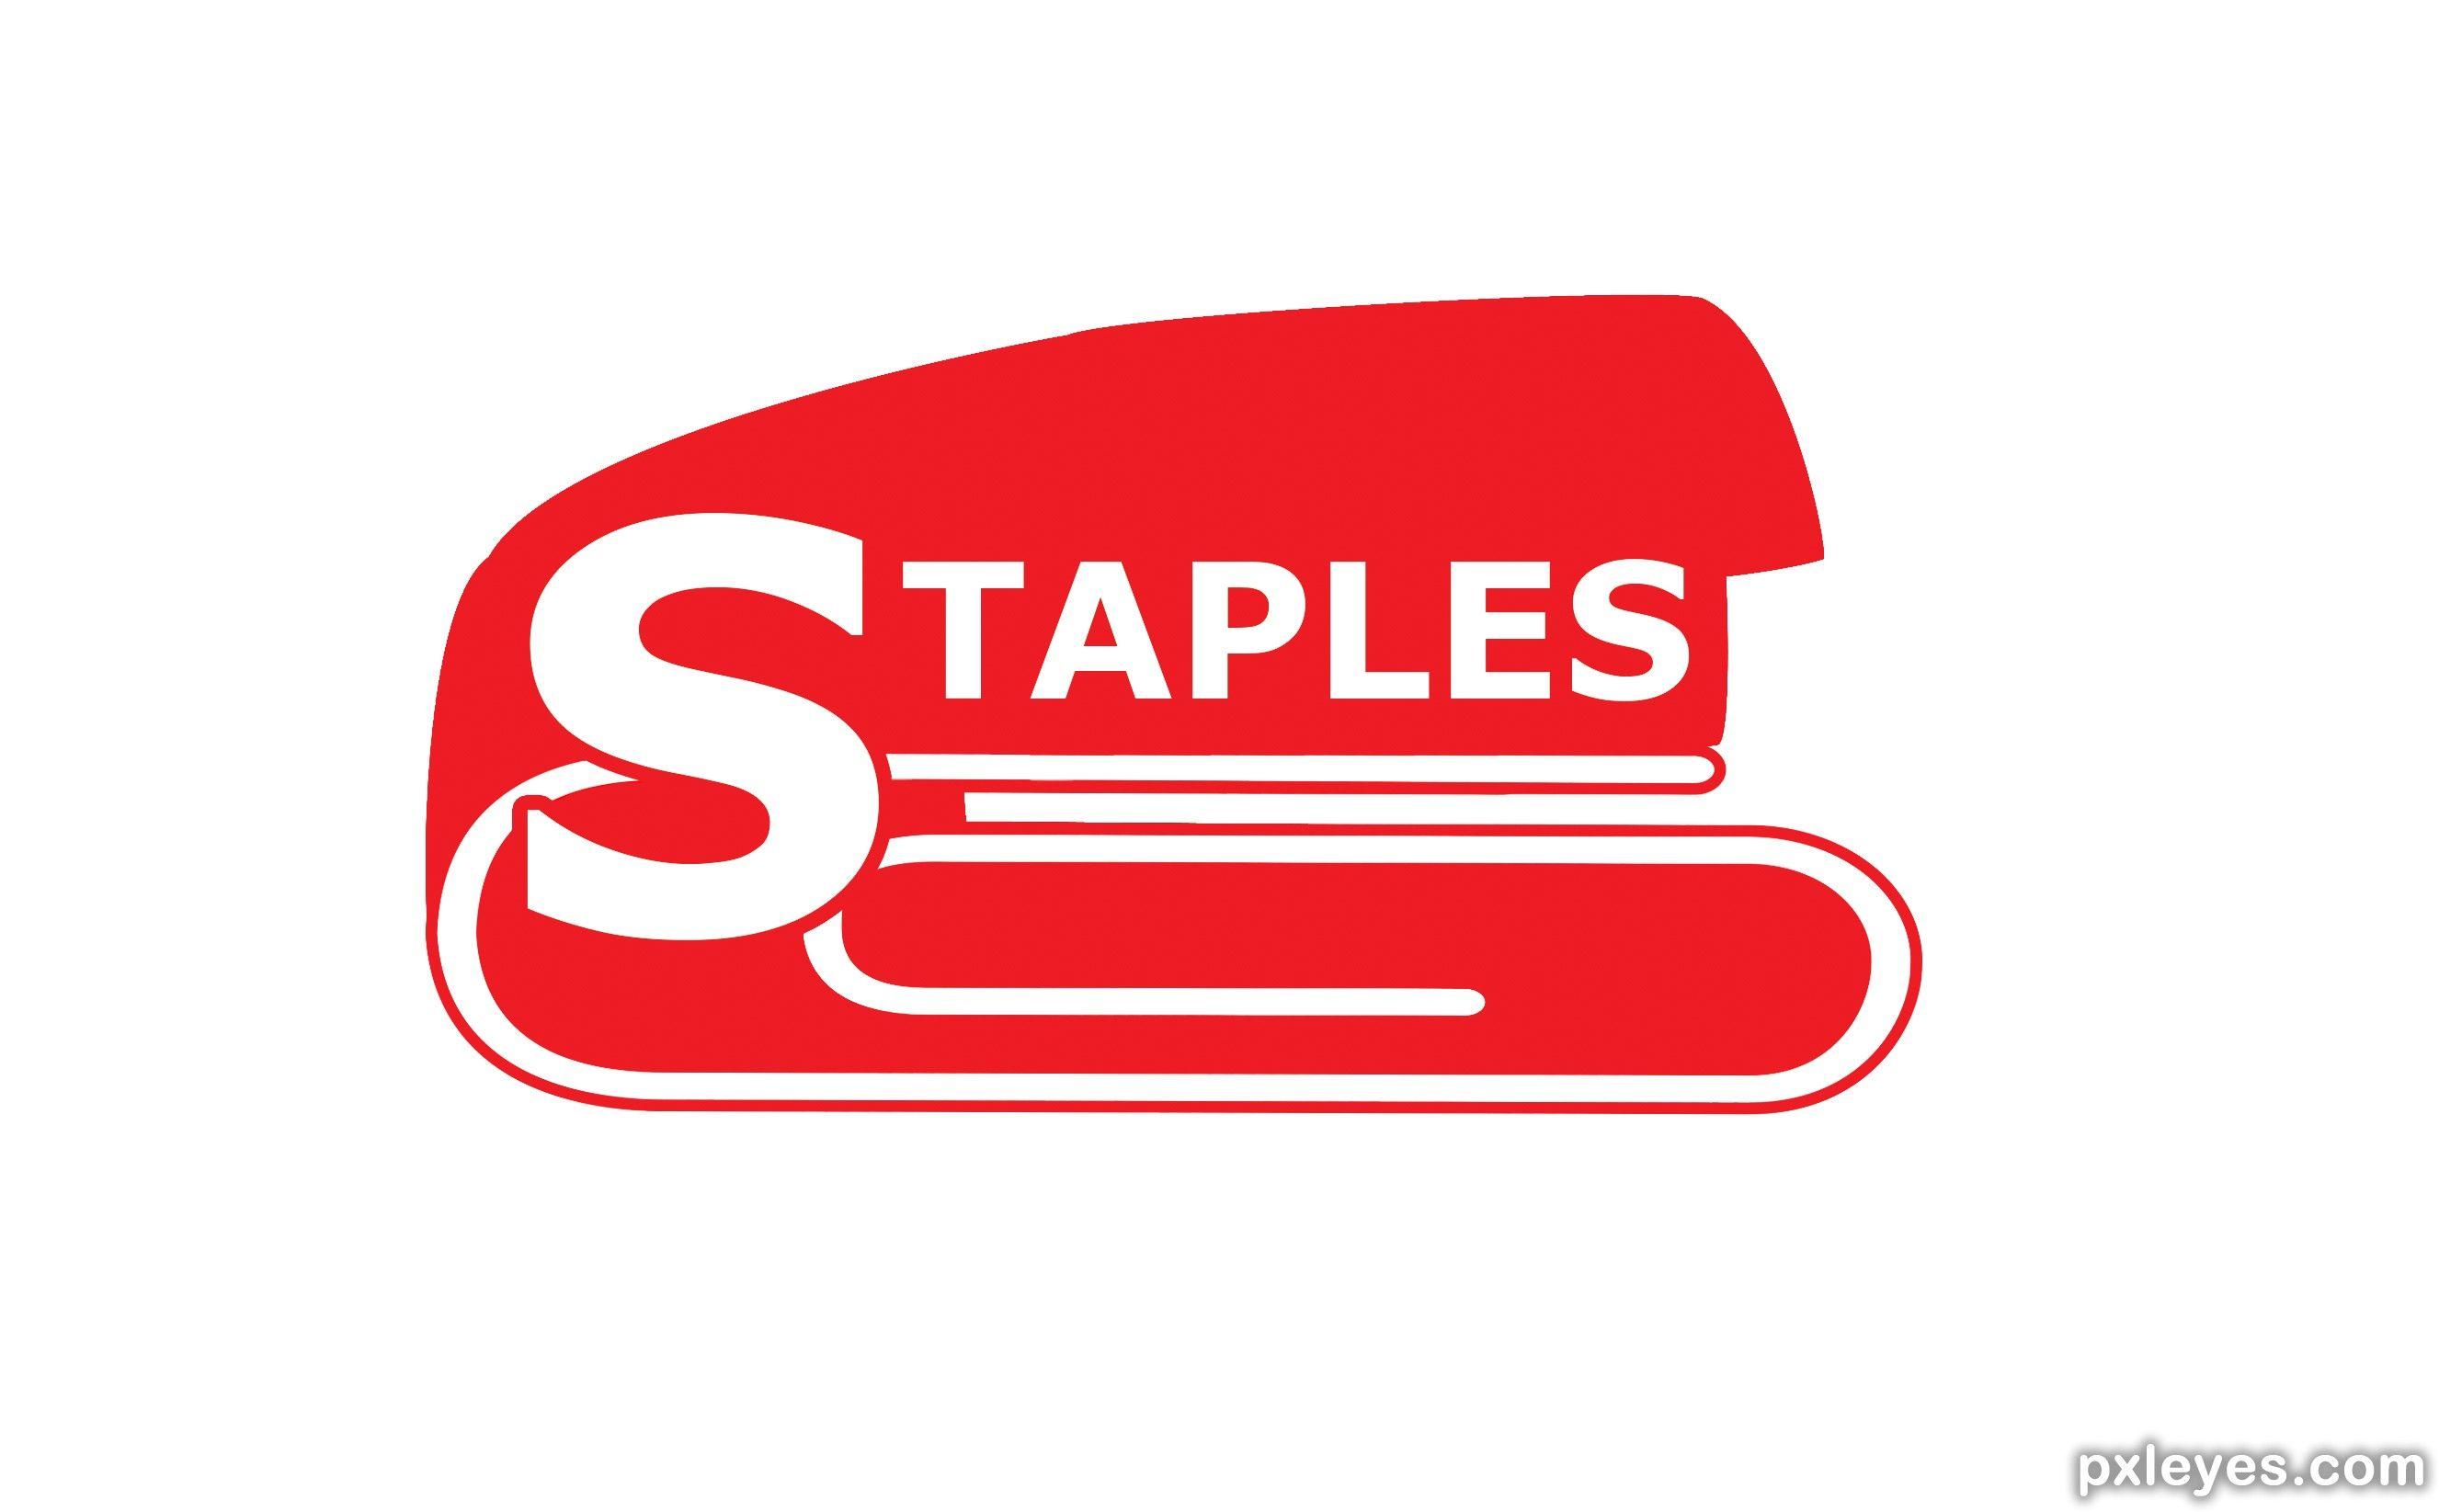 Staples Logo - Staples picture, by rturnbow for: logo remix photohop contest